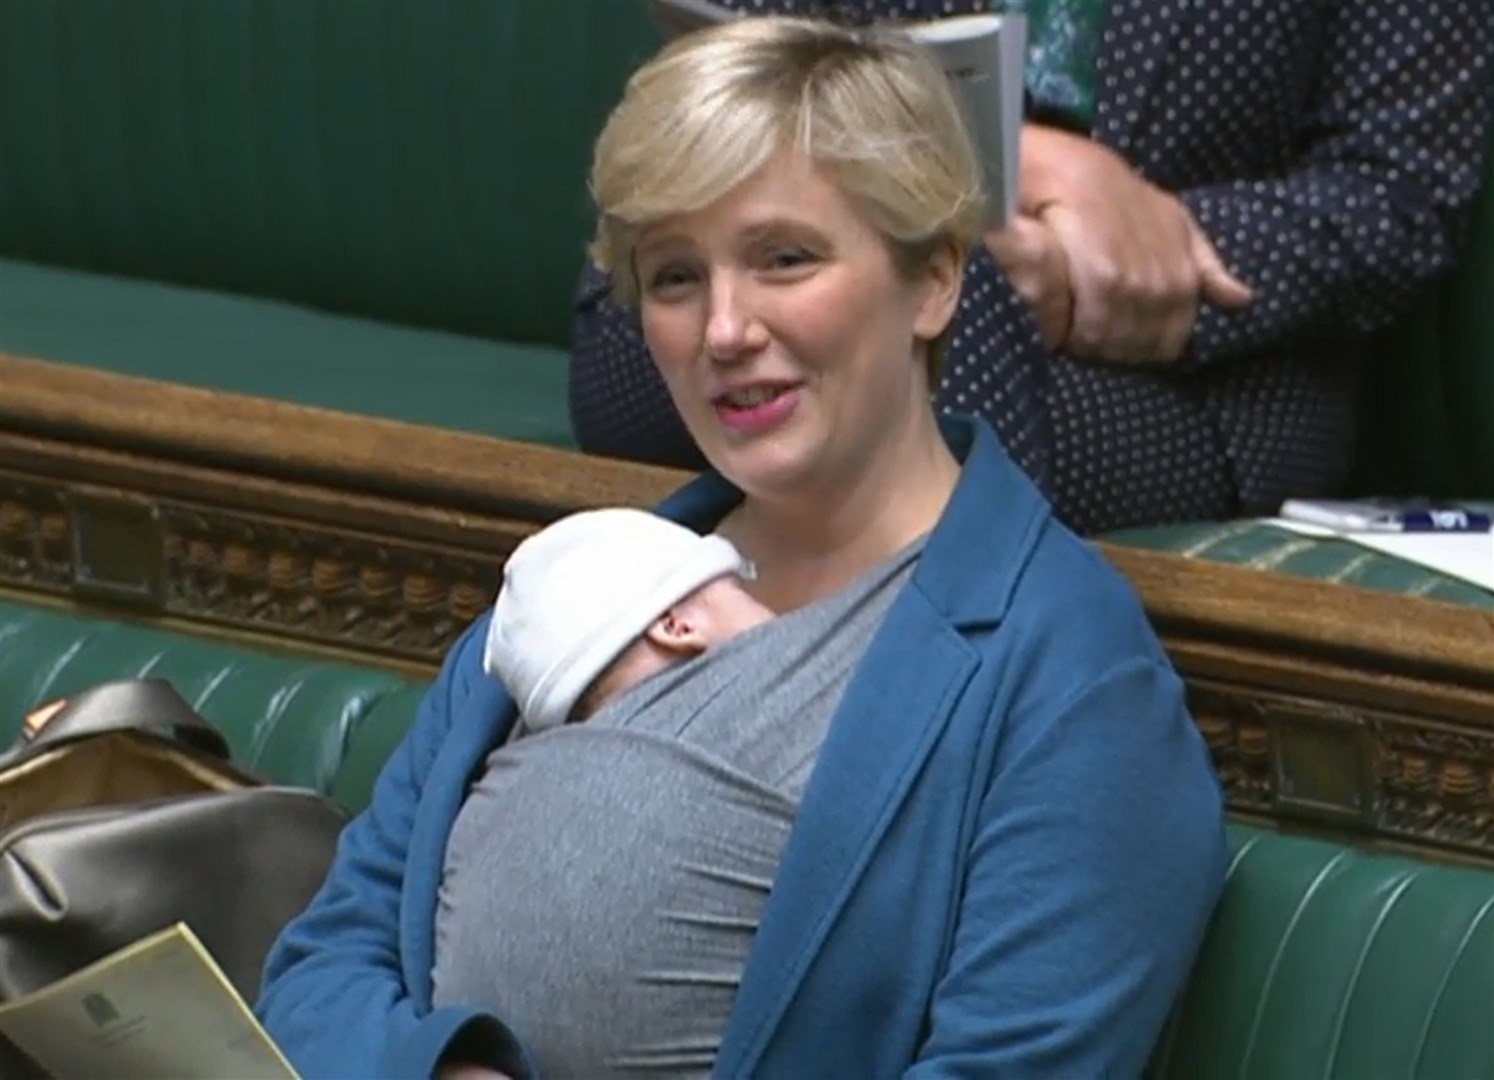 Labour MP Stella Creasy speaking in the chamber of the House of Commons, in London, with her newborn baby strapped to her (House of Commons/PA)